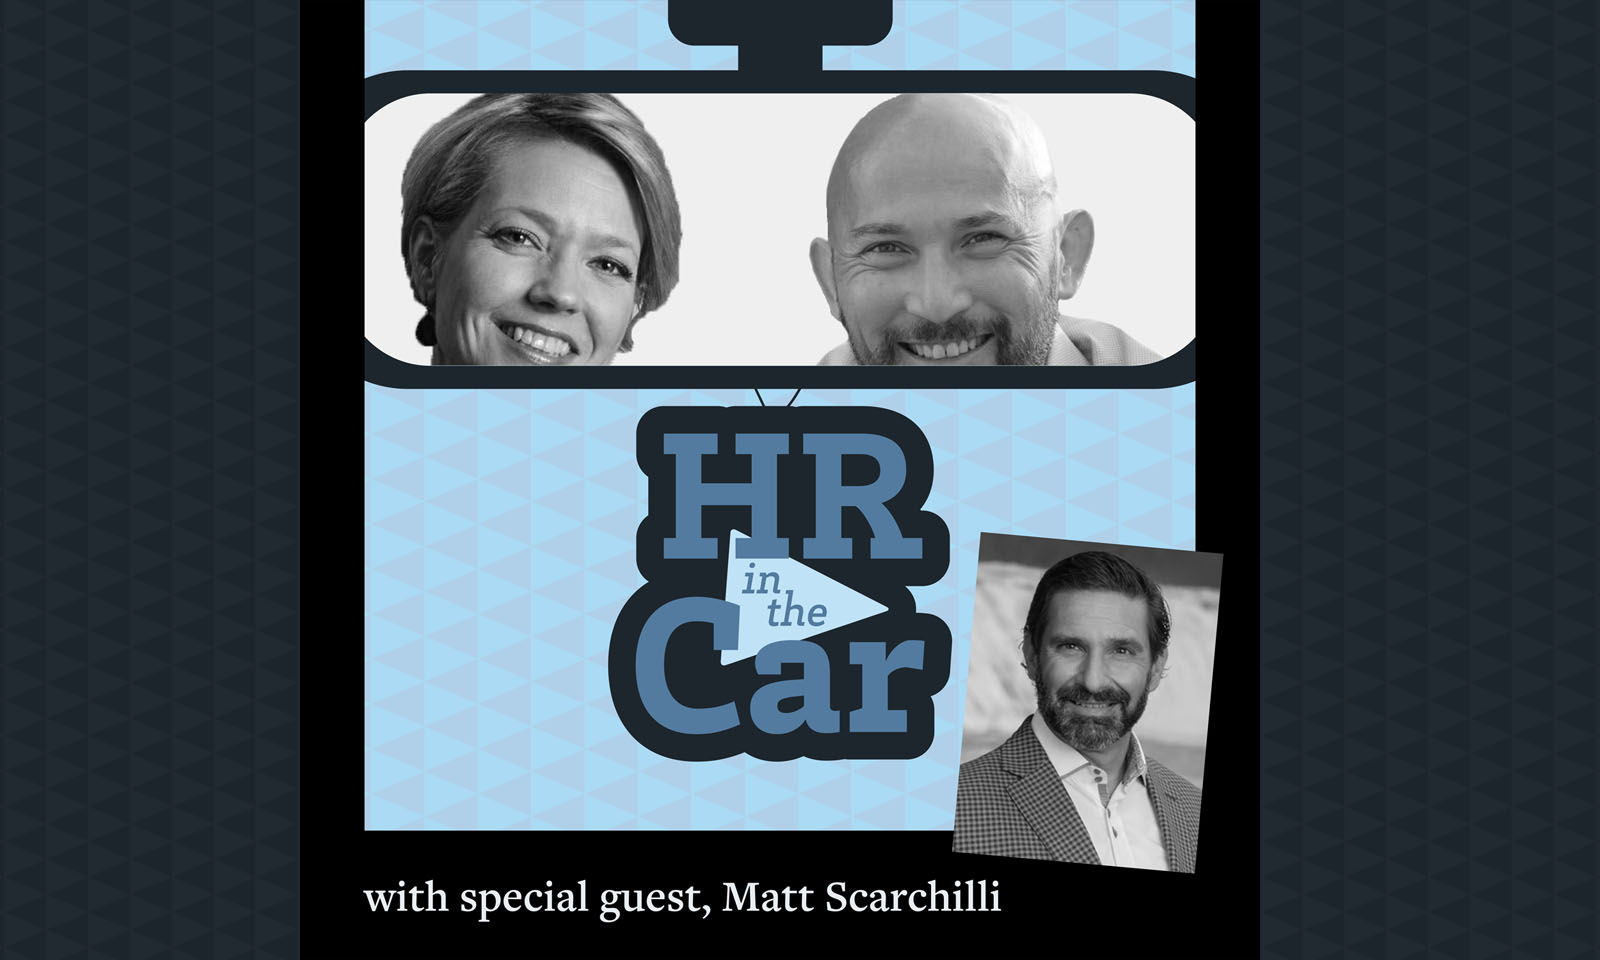 HR in the Car - Episode 23: "Lean On Your Network"